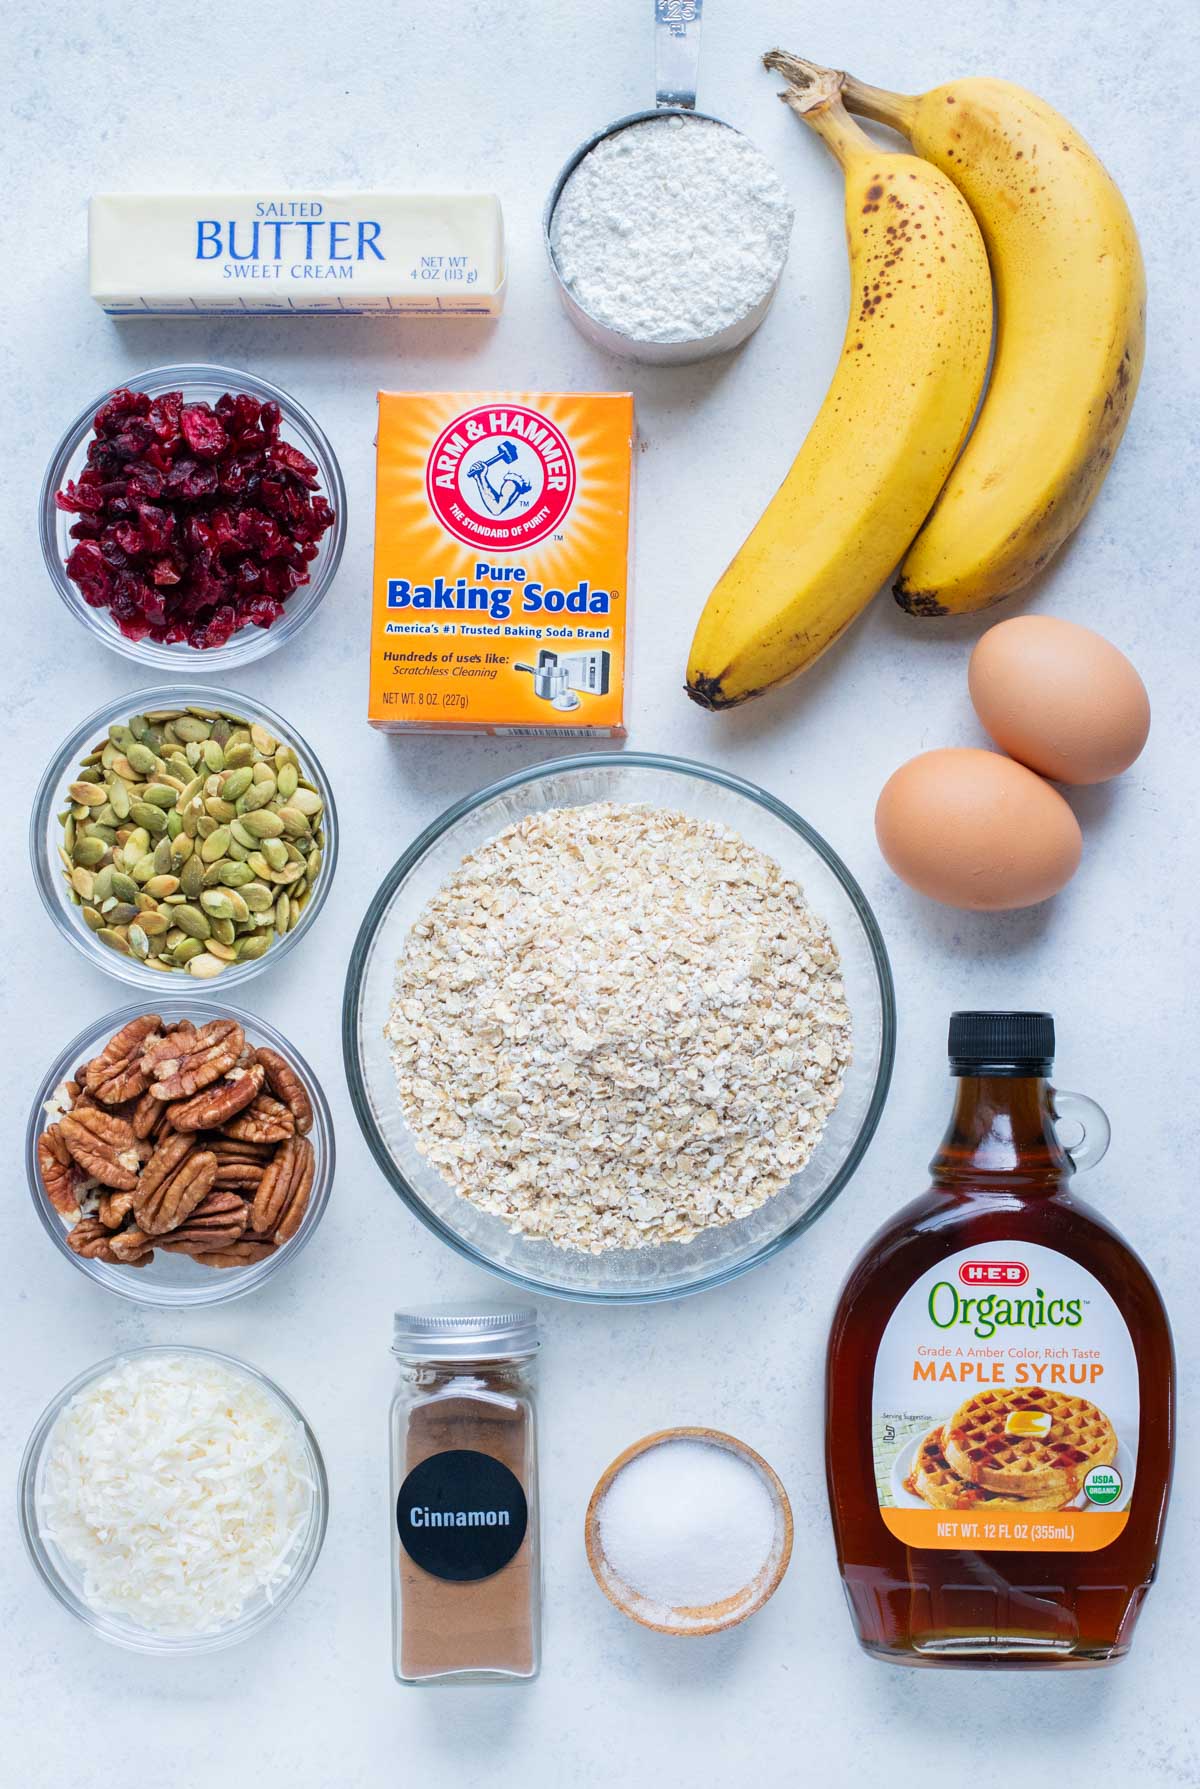 Eggs, flour, bananas, sweeteners, oats, baking soda, nuts, and dried fruit are all the ingredients in this recipe.